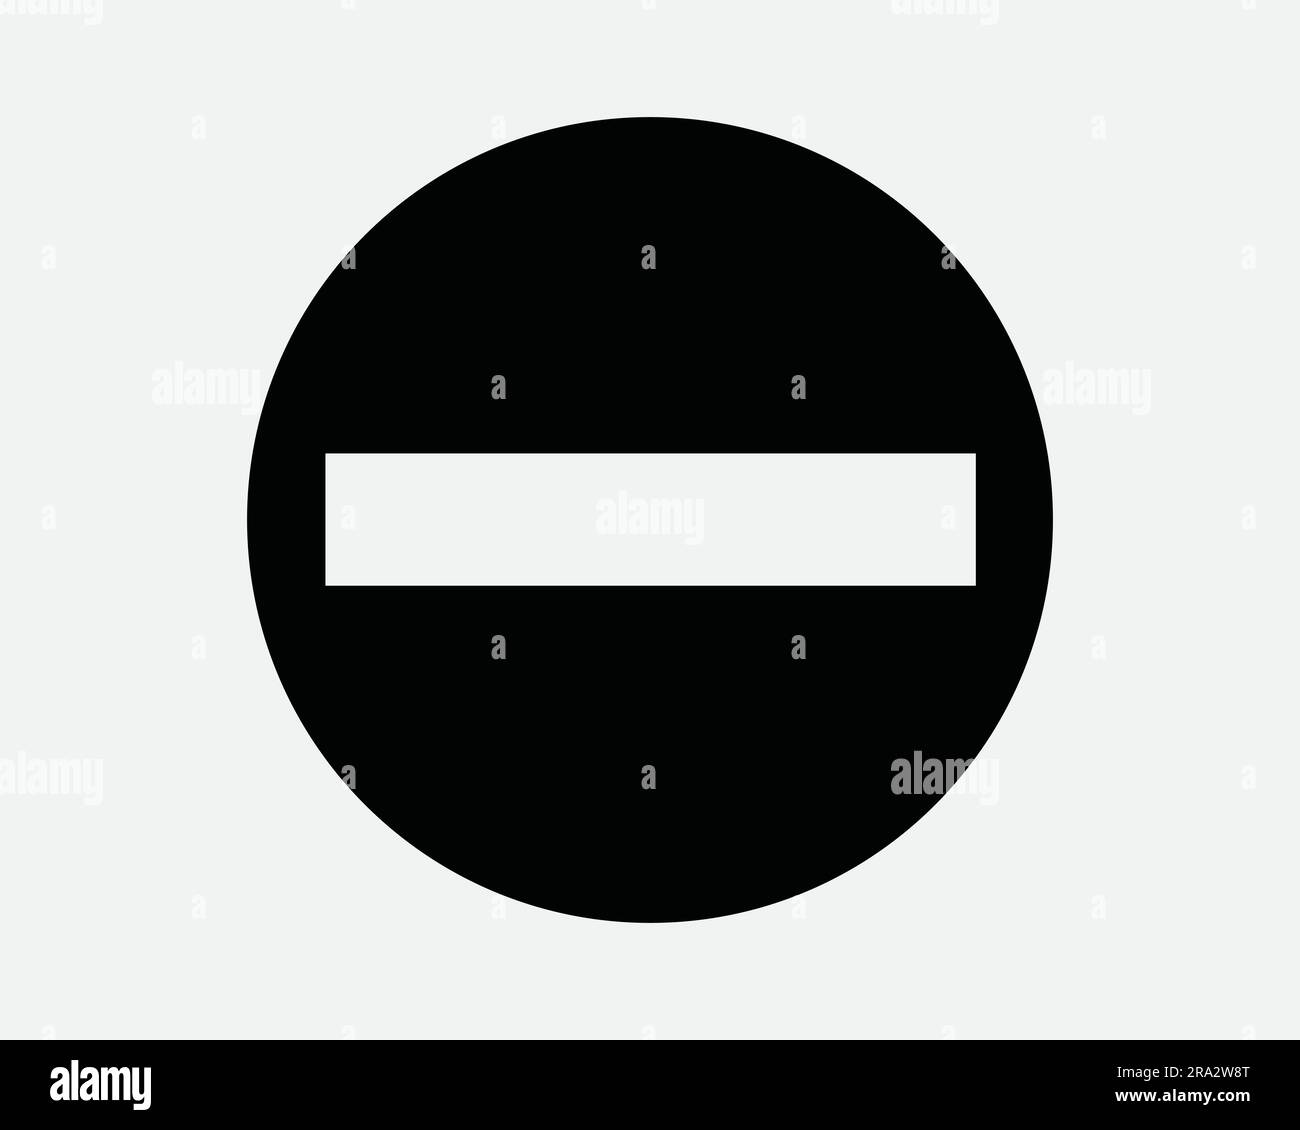 No Entry Sign. Traffic Road Symbol Do Not Enter Entrance Denied Restricted Warning Safety Circle Round. Black White Graphic Icon Artwork Vector EPS Stock Vector